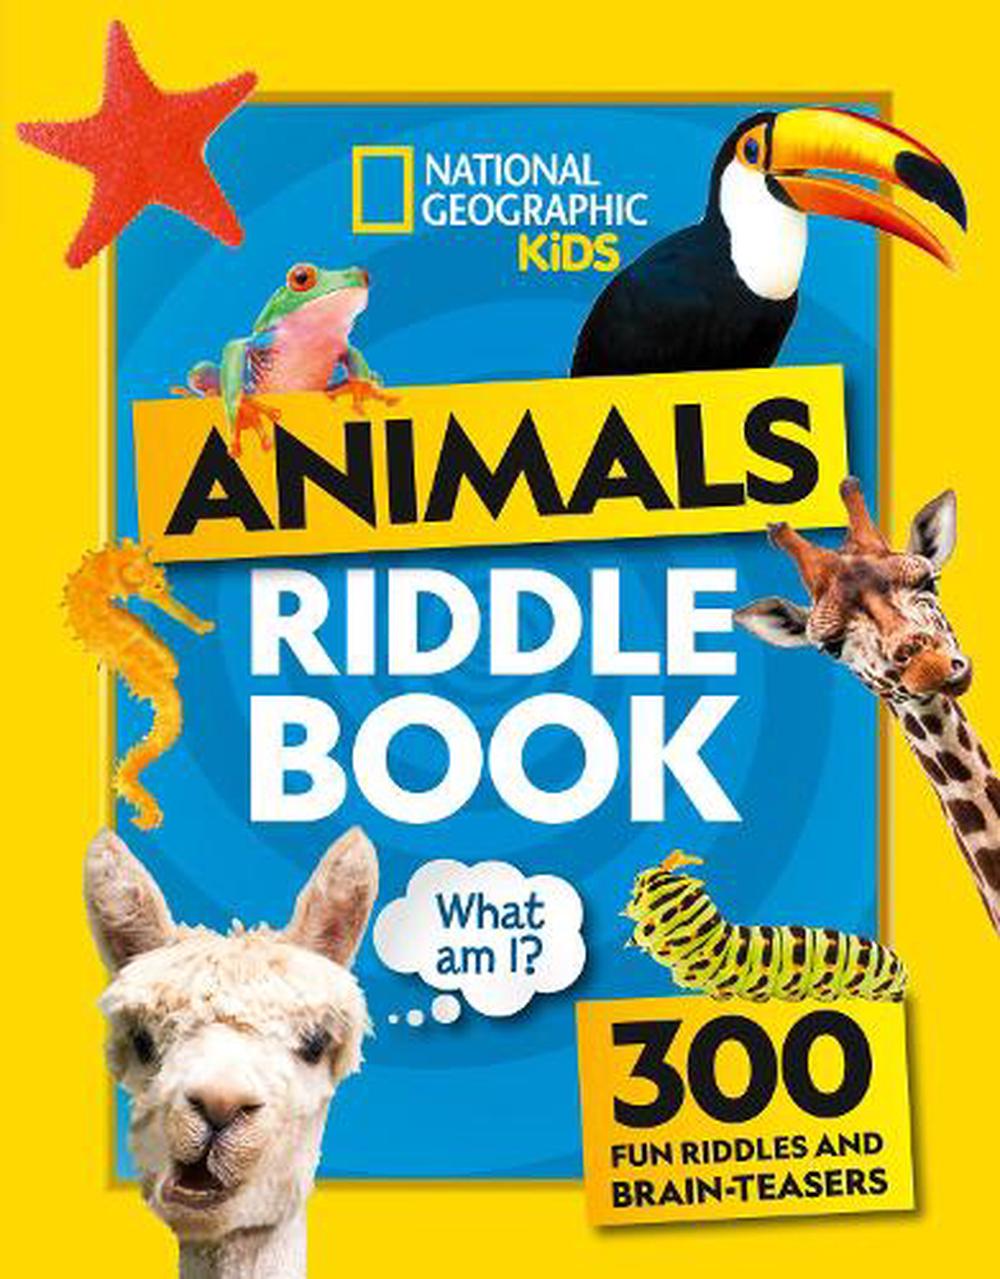 Kids,　Nile　Animal　at　Geographic　Buy　Riddles　The　Book　online　by　National　Paperback,　9780008480158